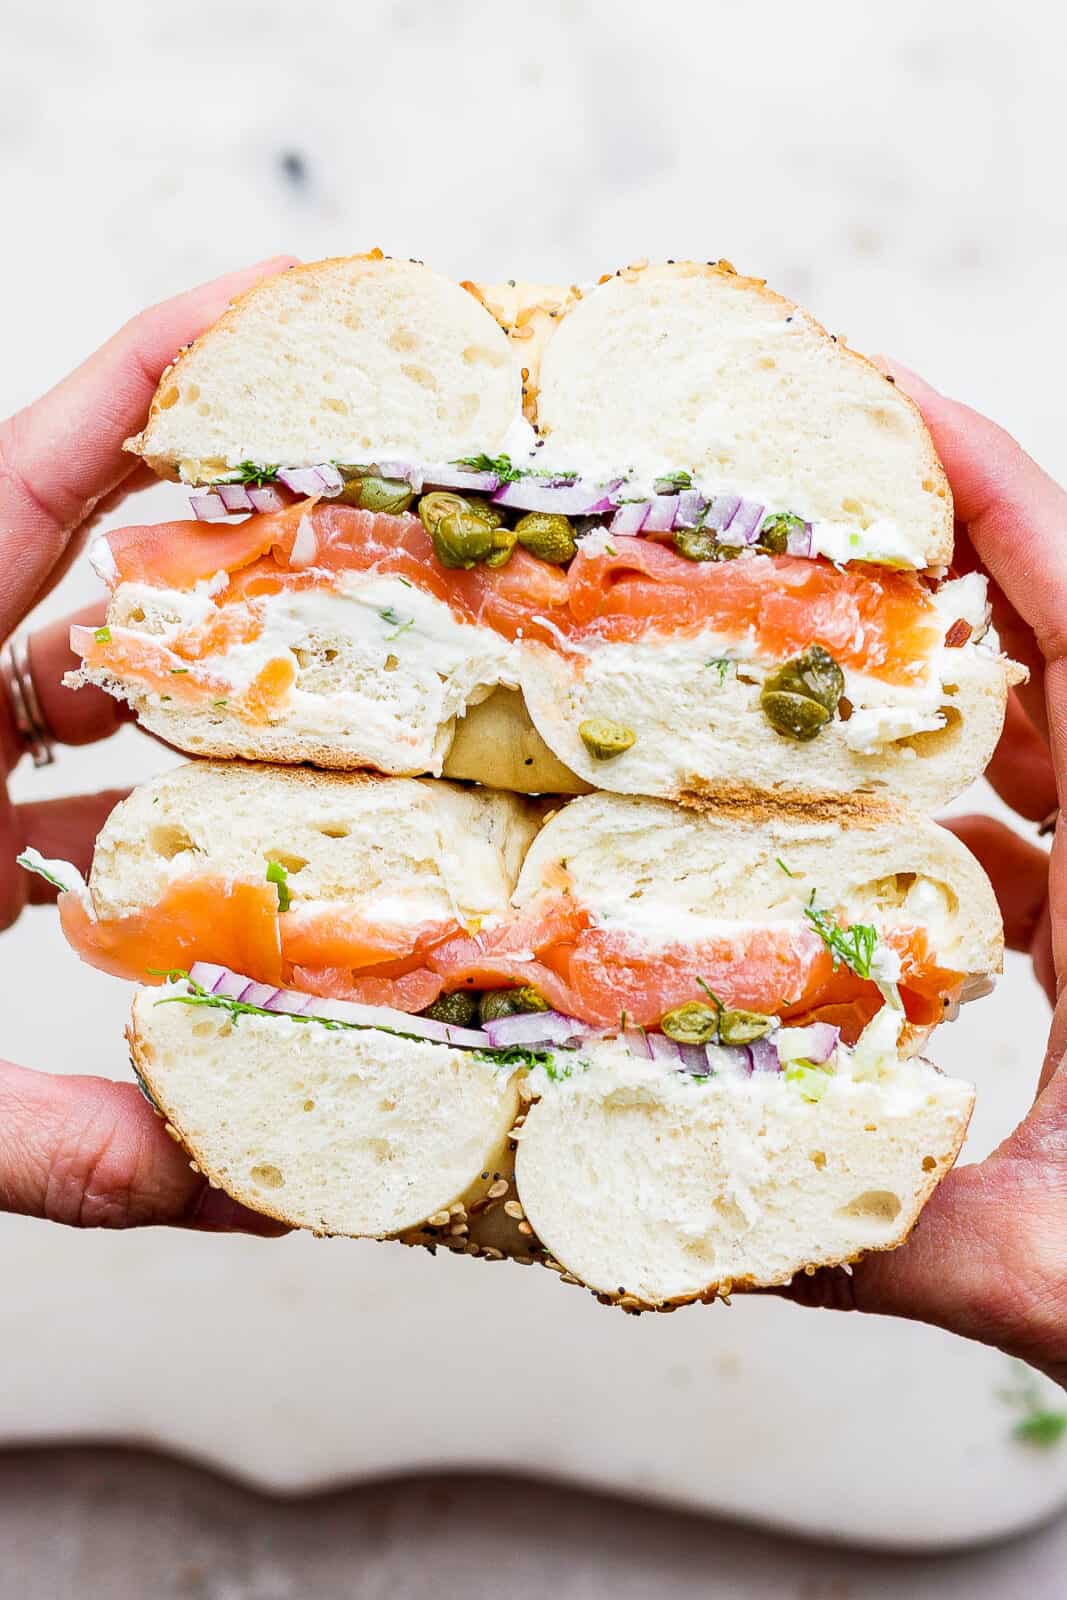 A lox bagel sandwich cut in half and held so you can see the inside.